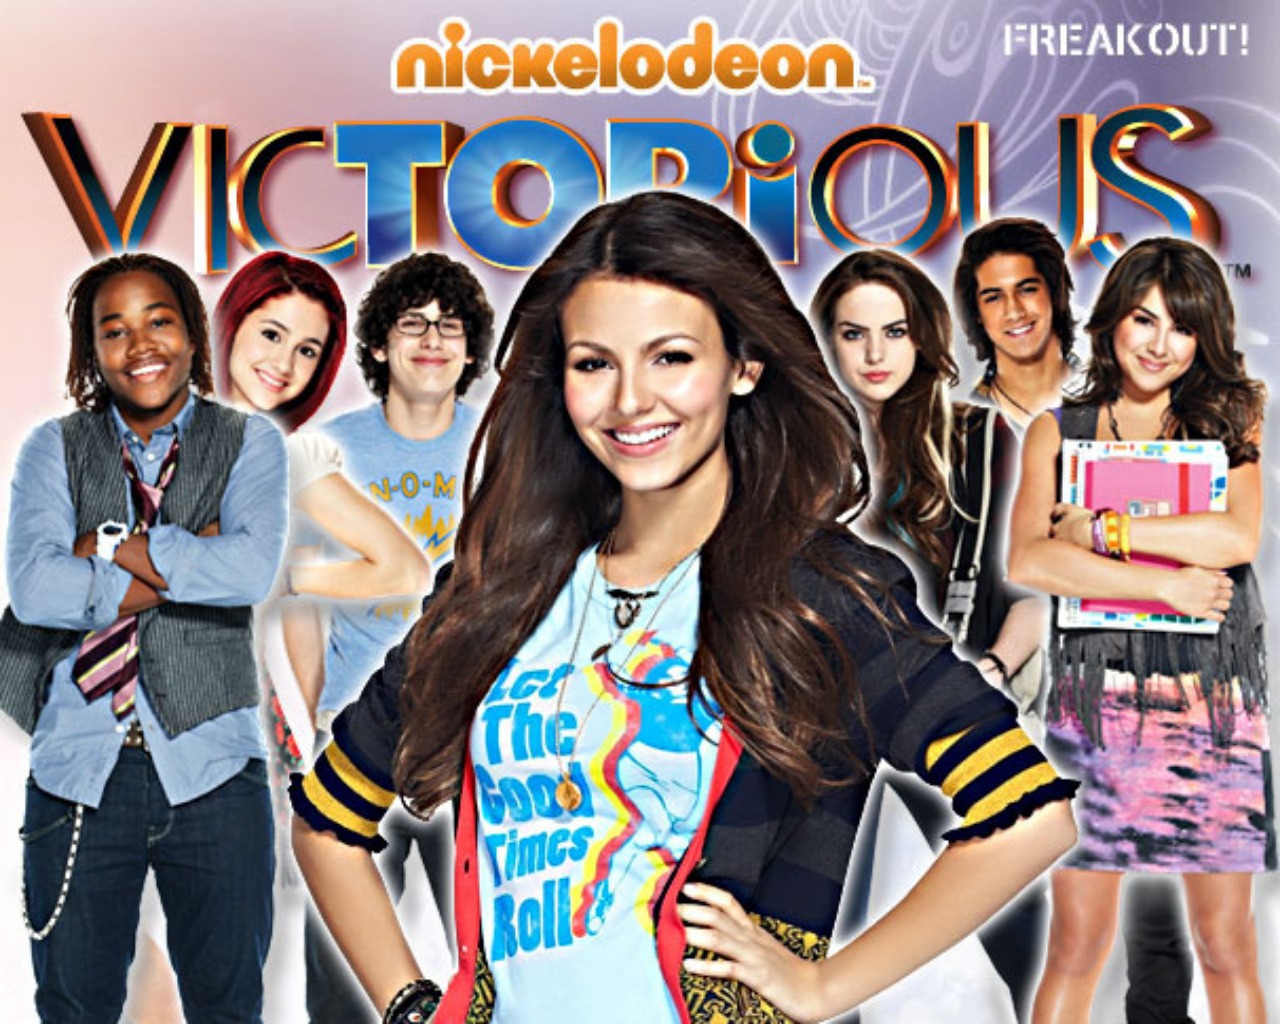 Victorious Image HD Wallpaper And Background Photos